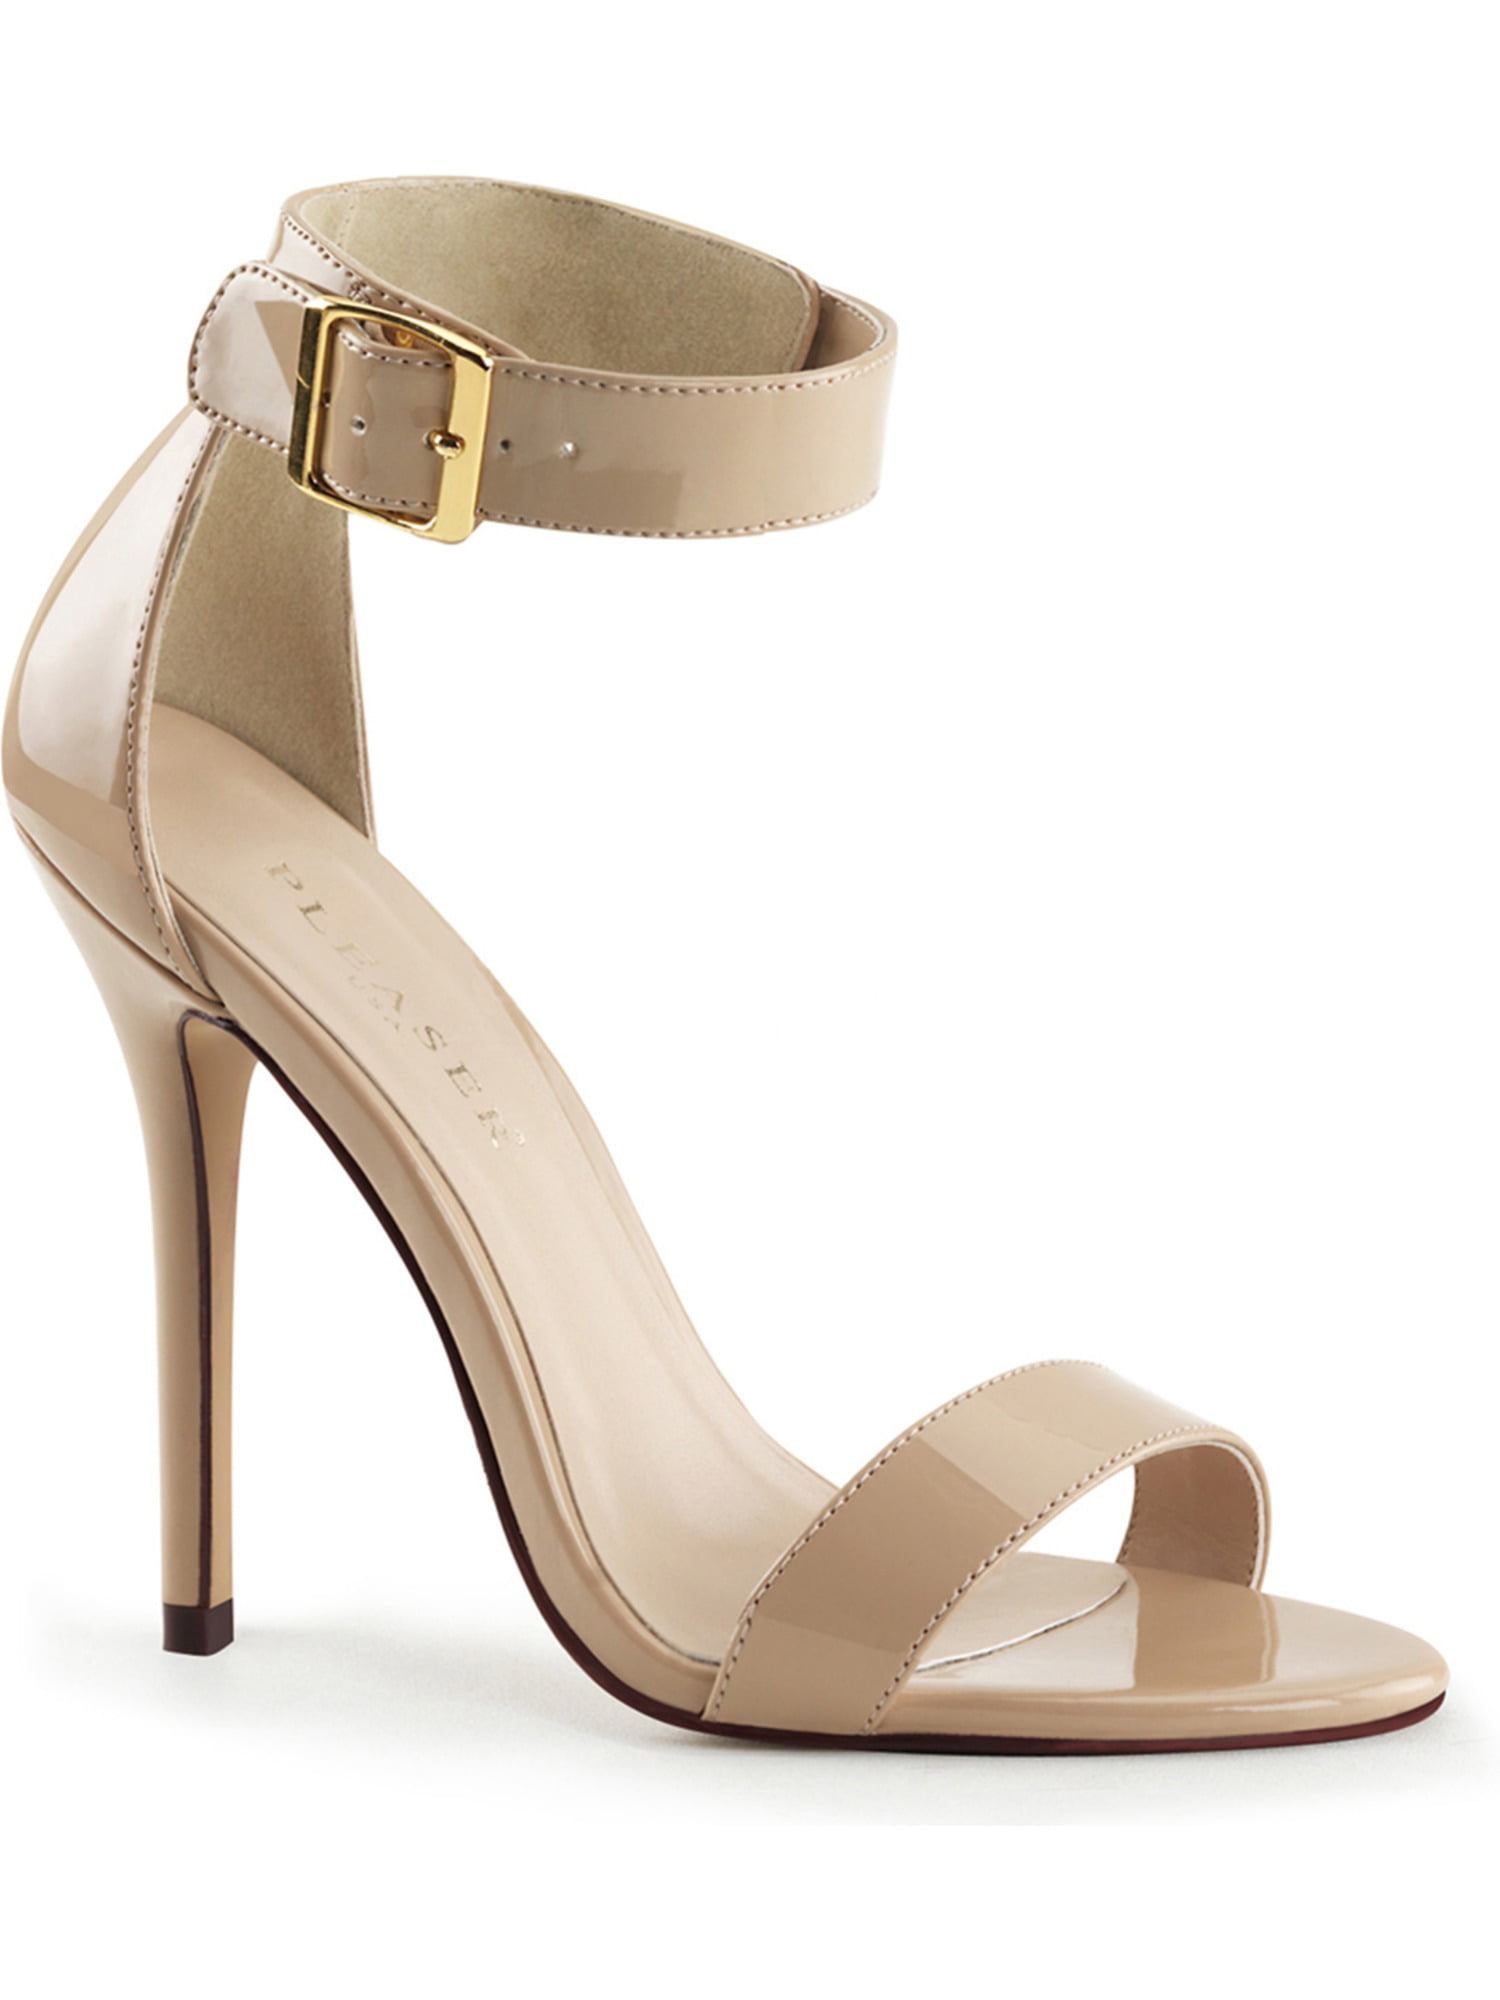 SummitFashions - womens charming nude dress shoes with ankle strap and ...